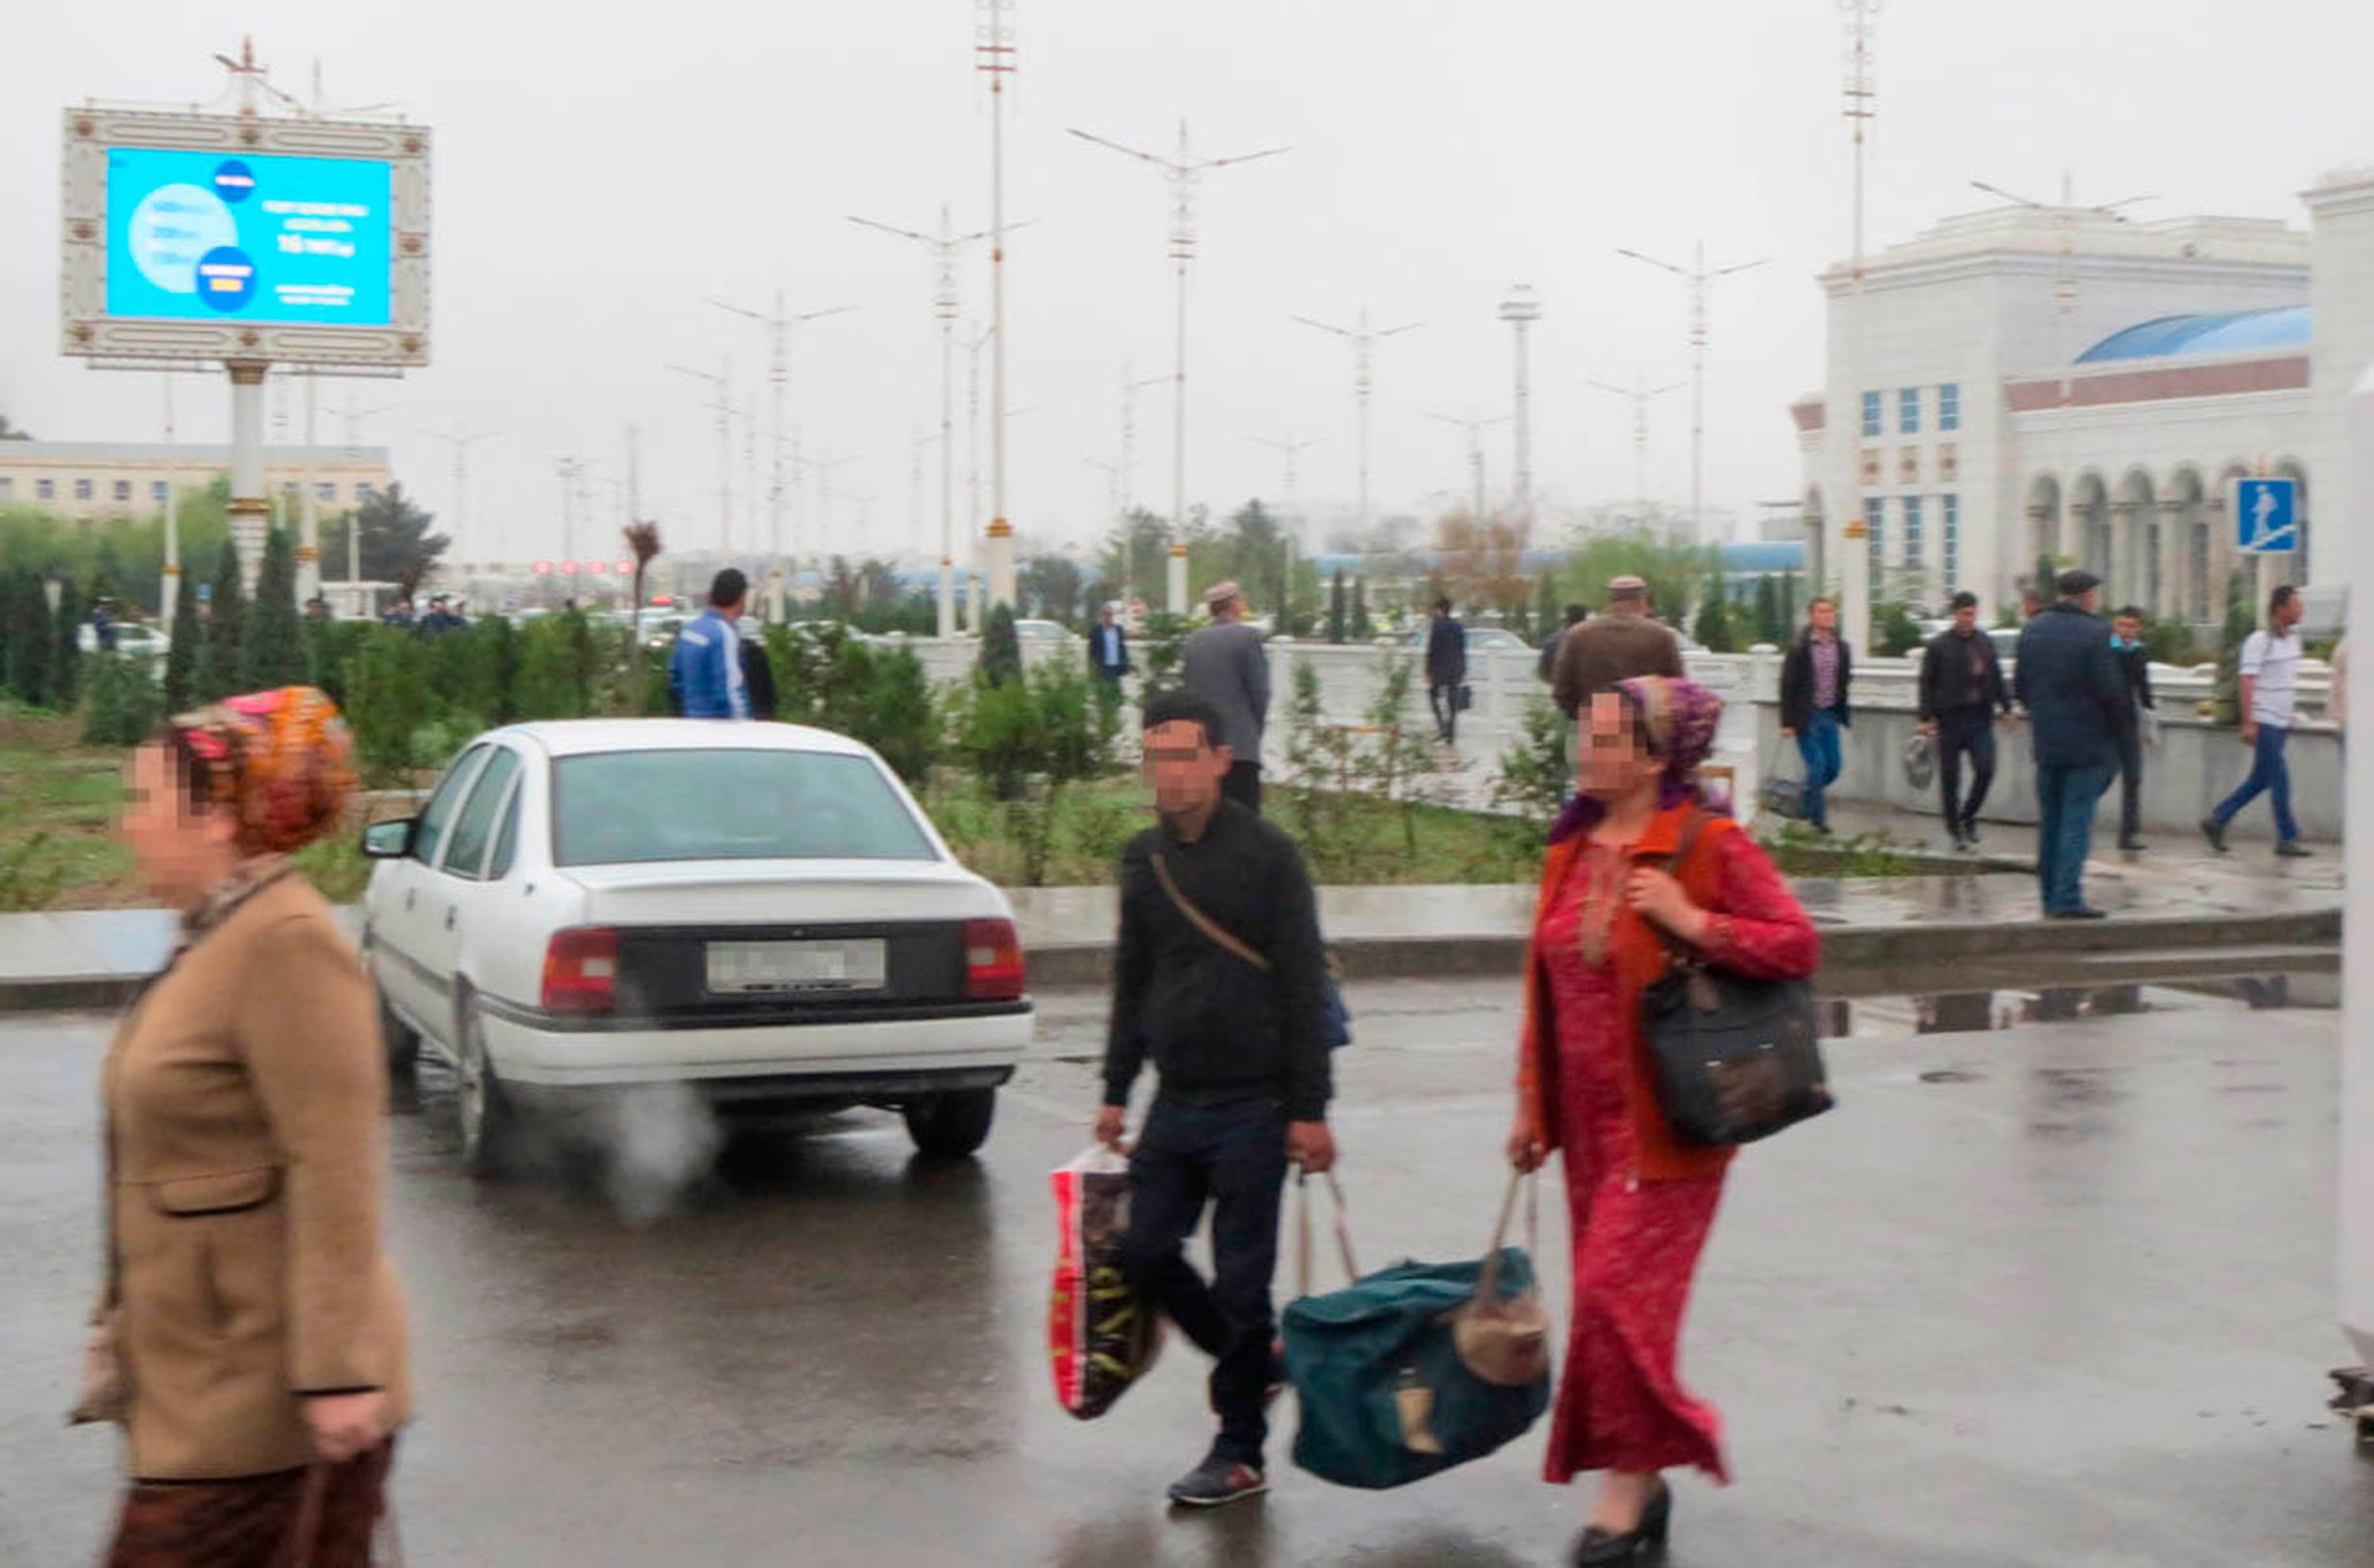 People pictured on Ashgabat streets, Image: 511090621, License: Rights-managed, Restrictions: , Model Release: no, Credit line: Turkmenistan Chronicles / East2West News / Profimedia